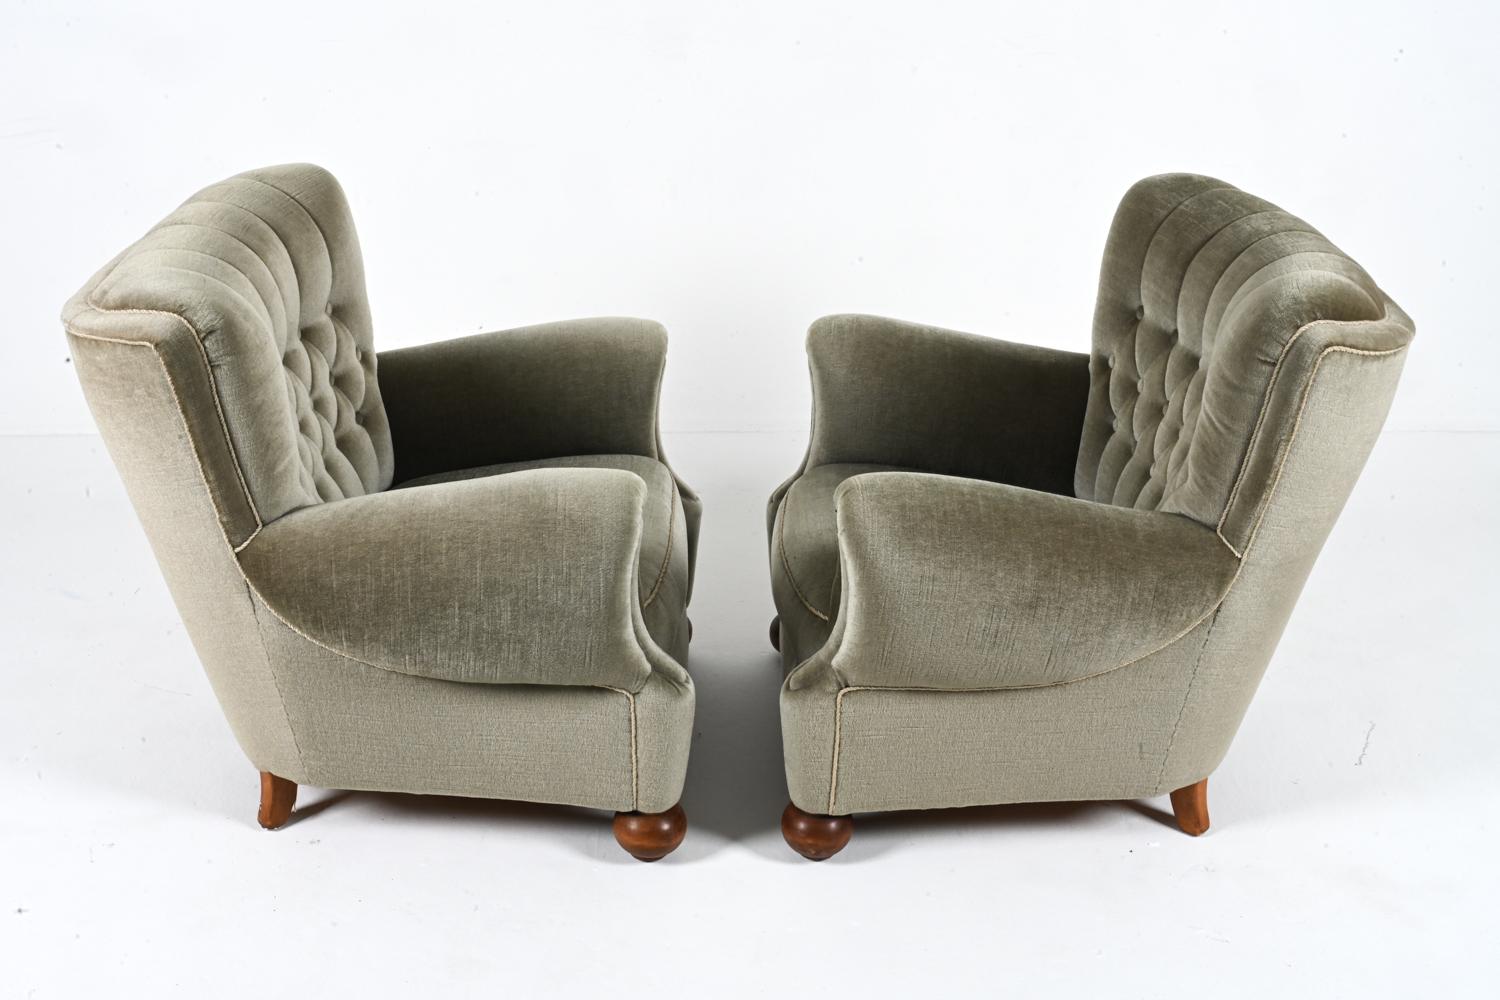 Pair of European Roll-Arm Club Chairs in Mohair and Beech, c. 1940's For Sale 11